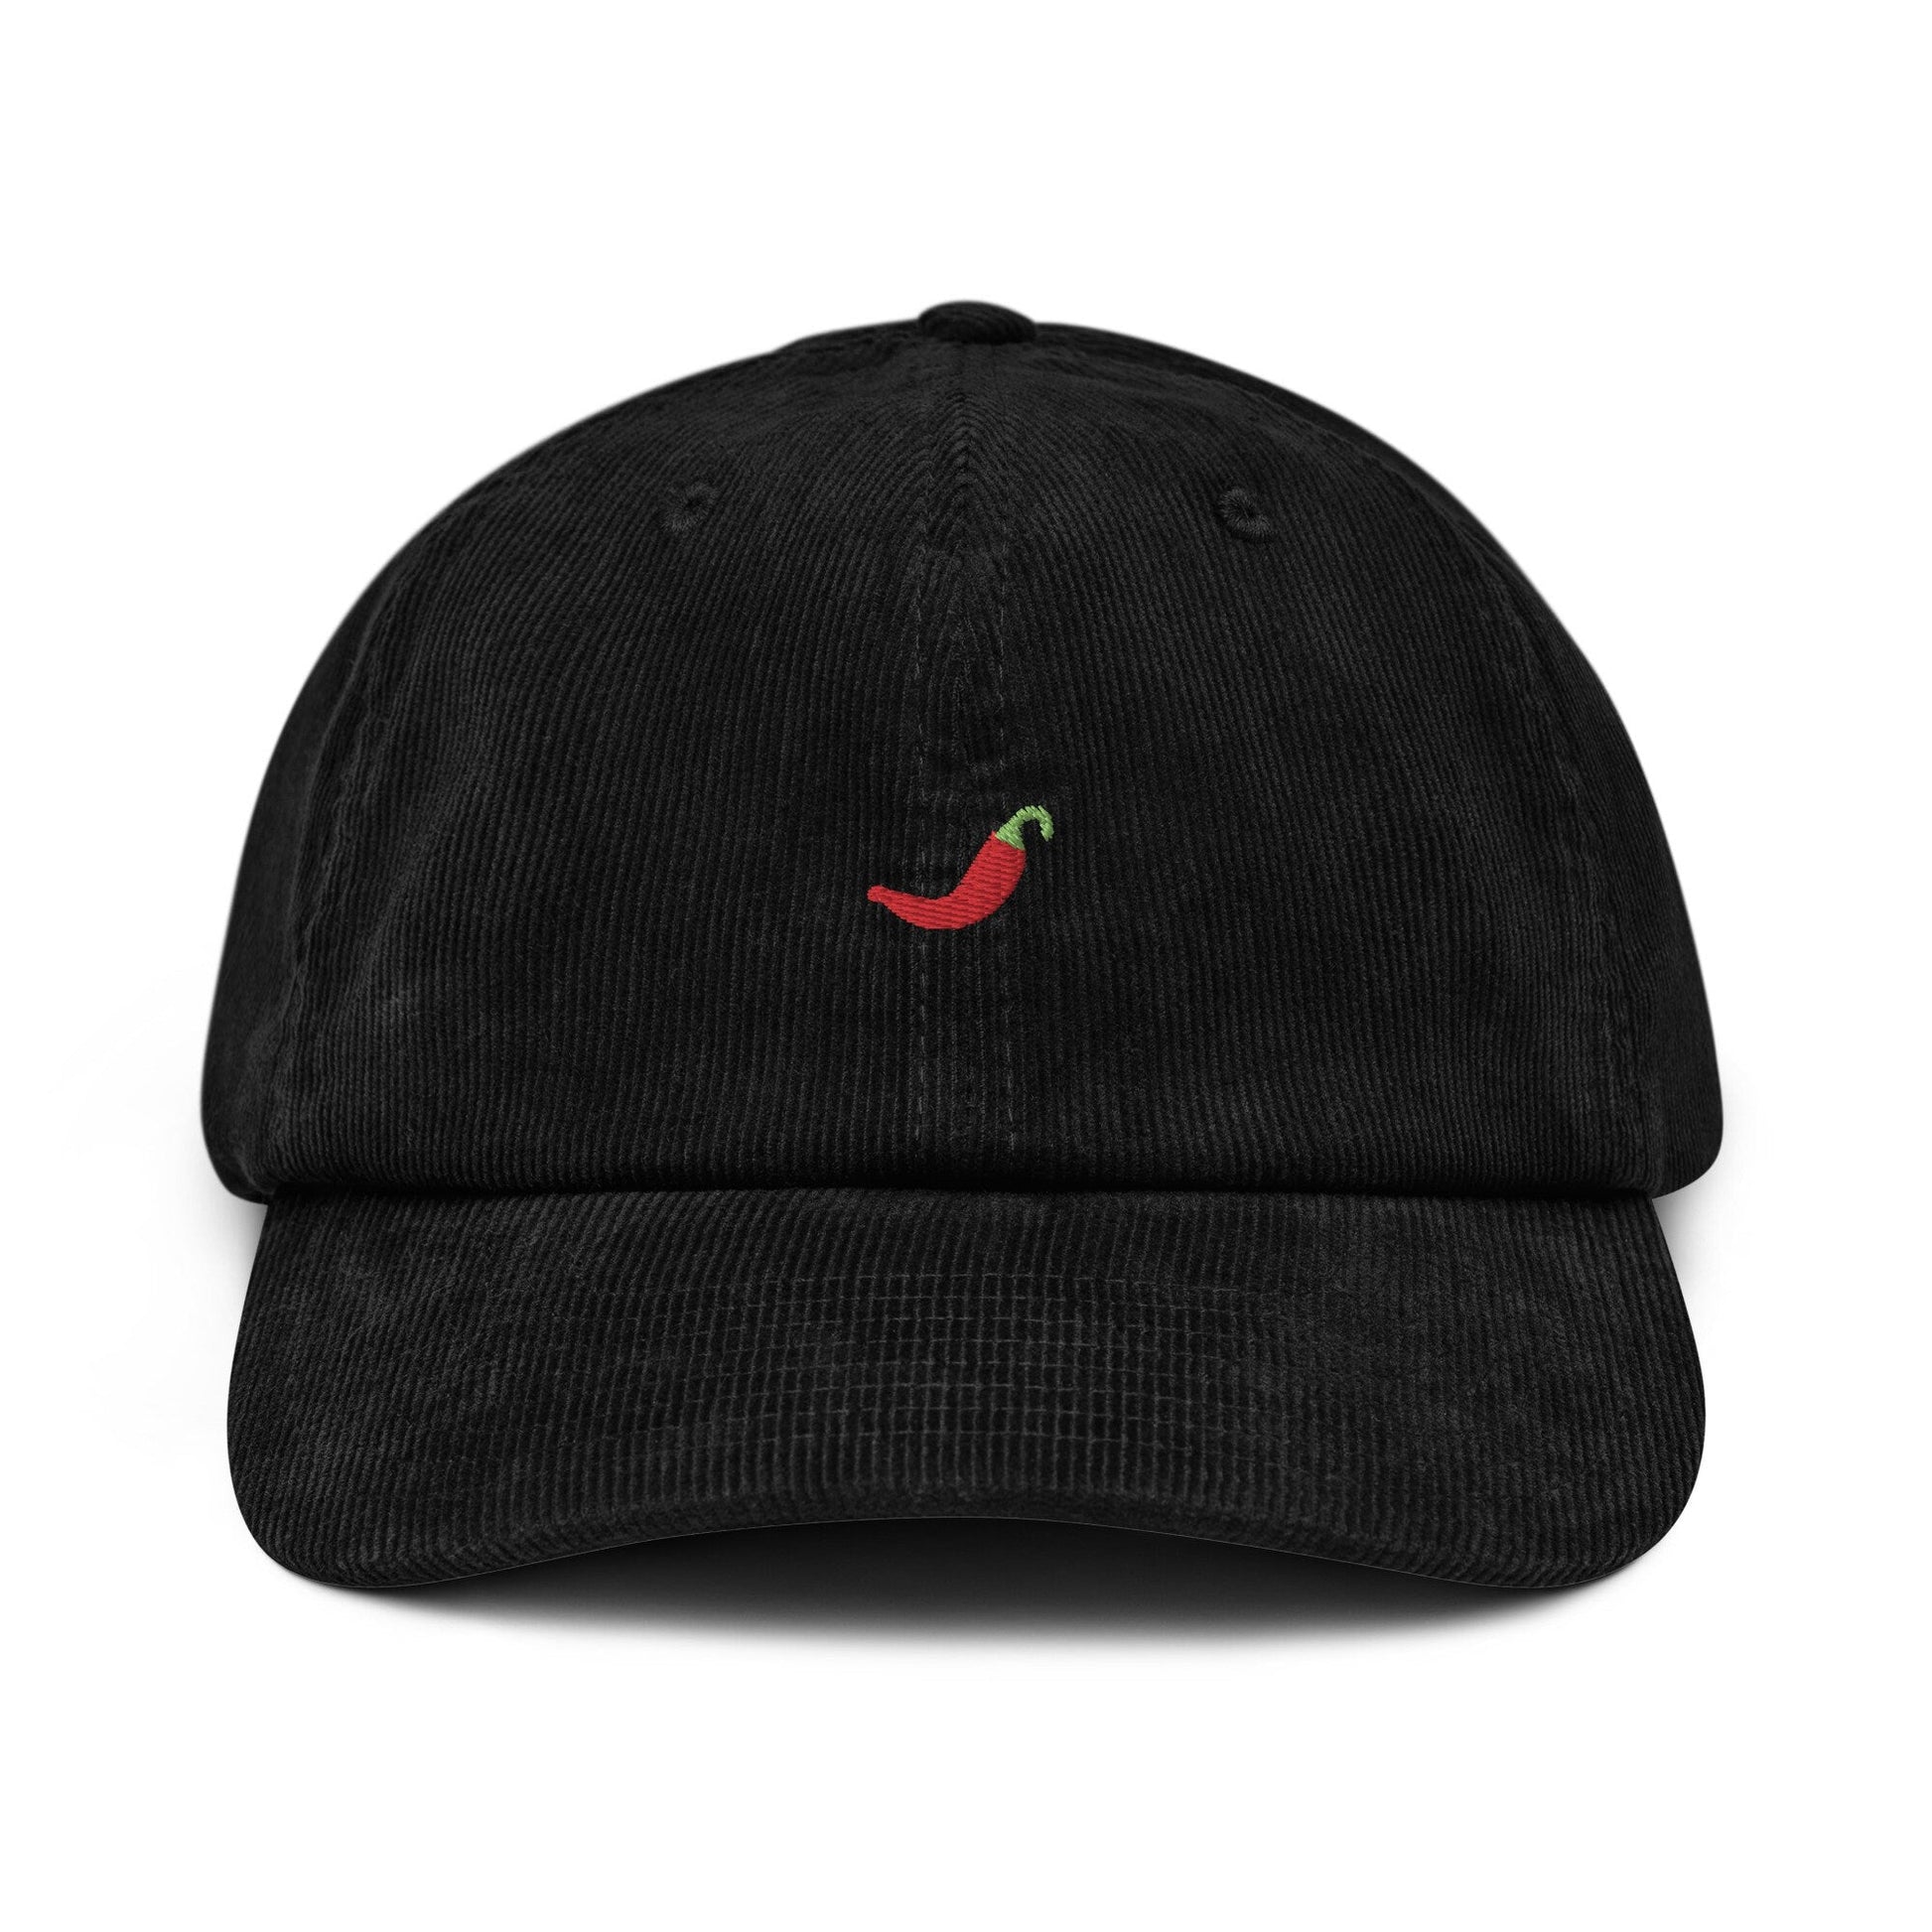 Hot Pepper Corduroy Hat - Gift for Hot Sauce and Spicy Food Lovers - Handmade embroidered Dad Cap - Evilwater Originals